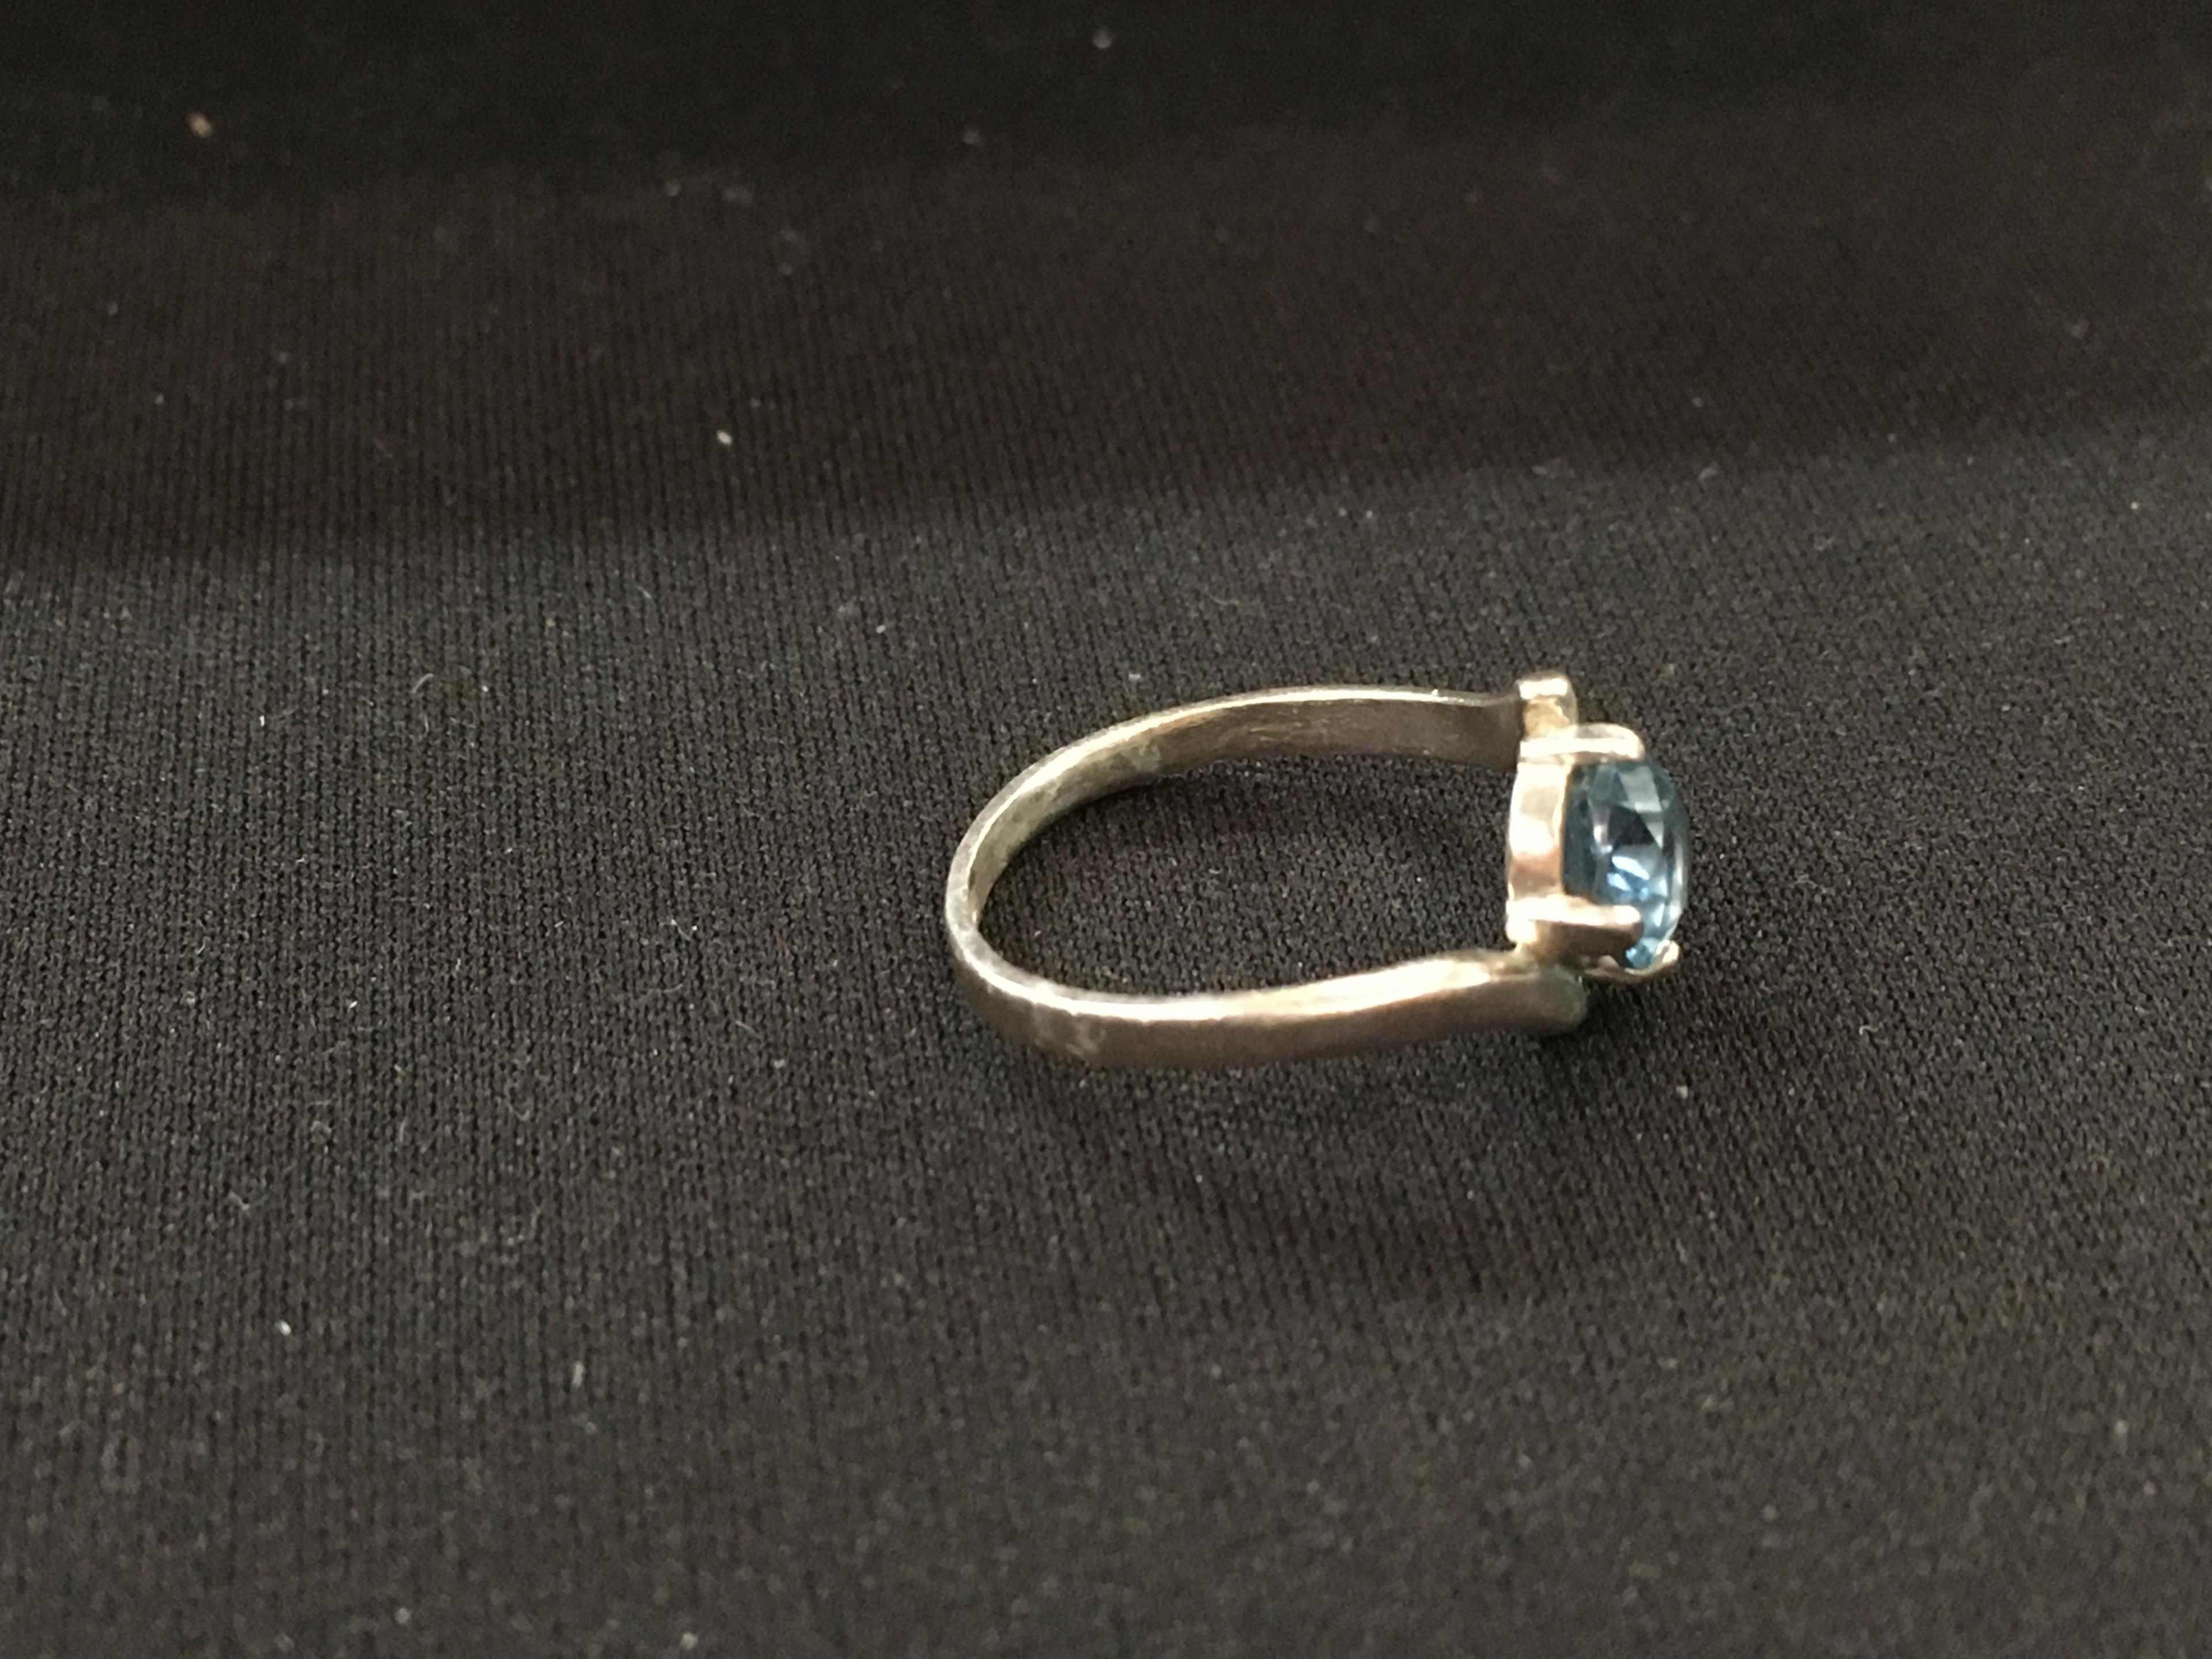 Diagonally Set Blue Oval Gemstone Set in Sterling Silver Bypass Ring - Size 4.75